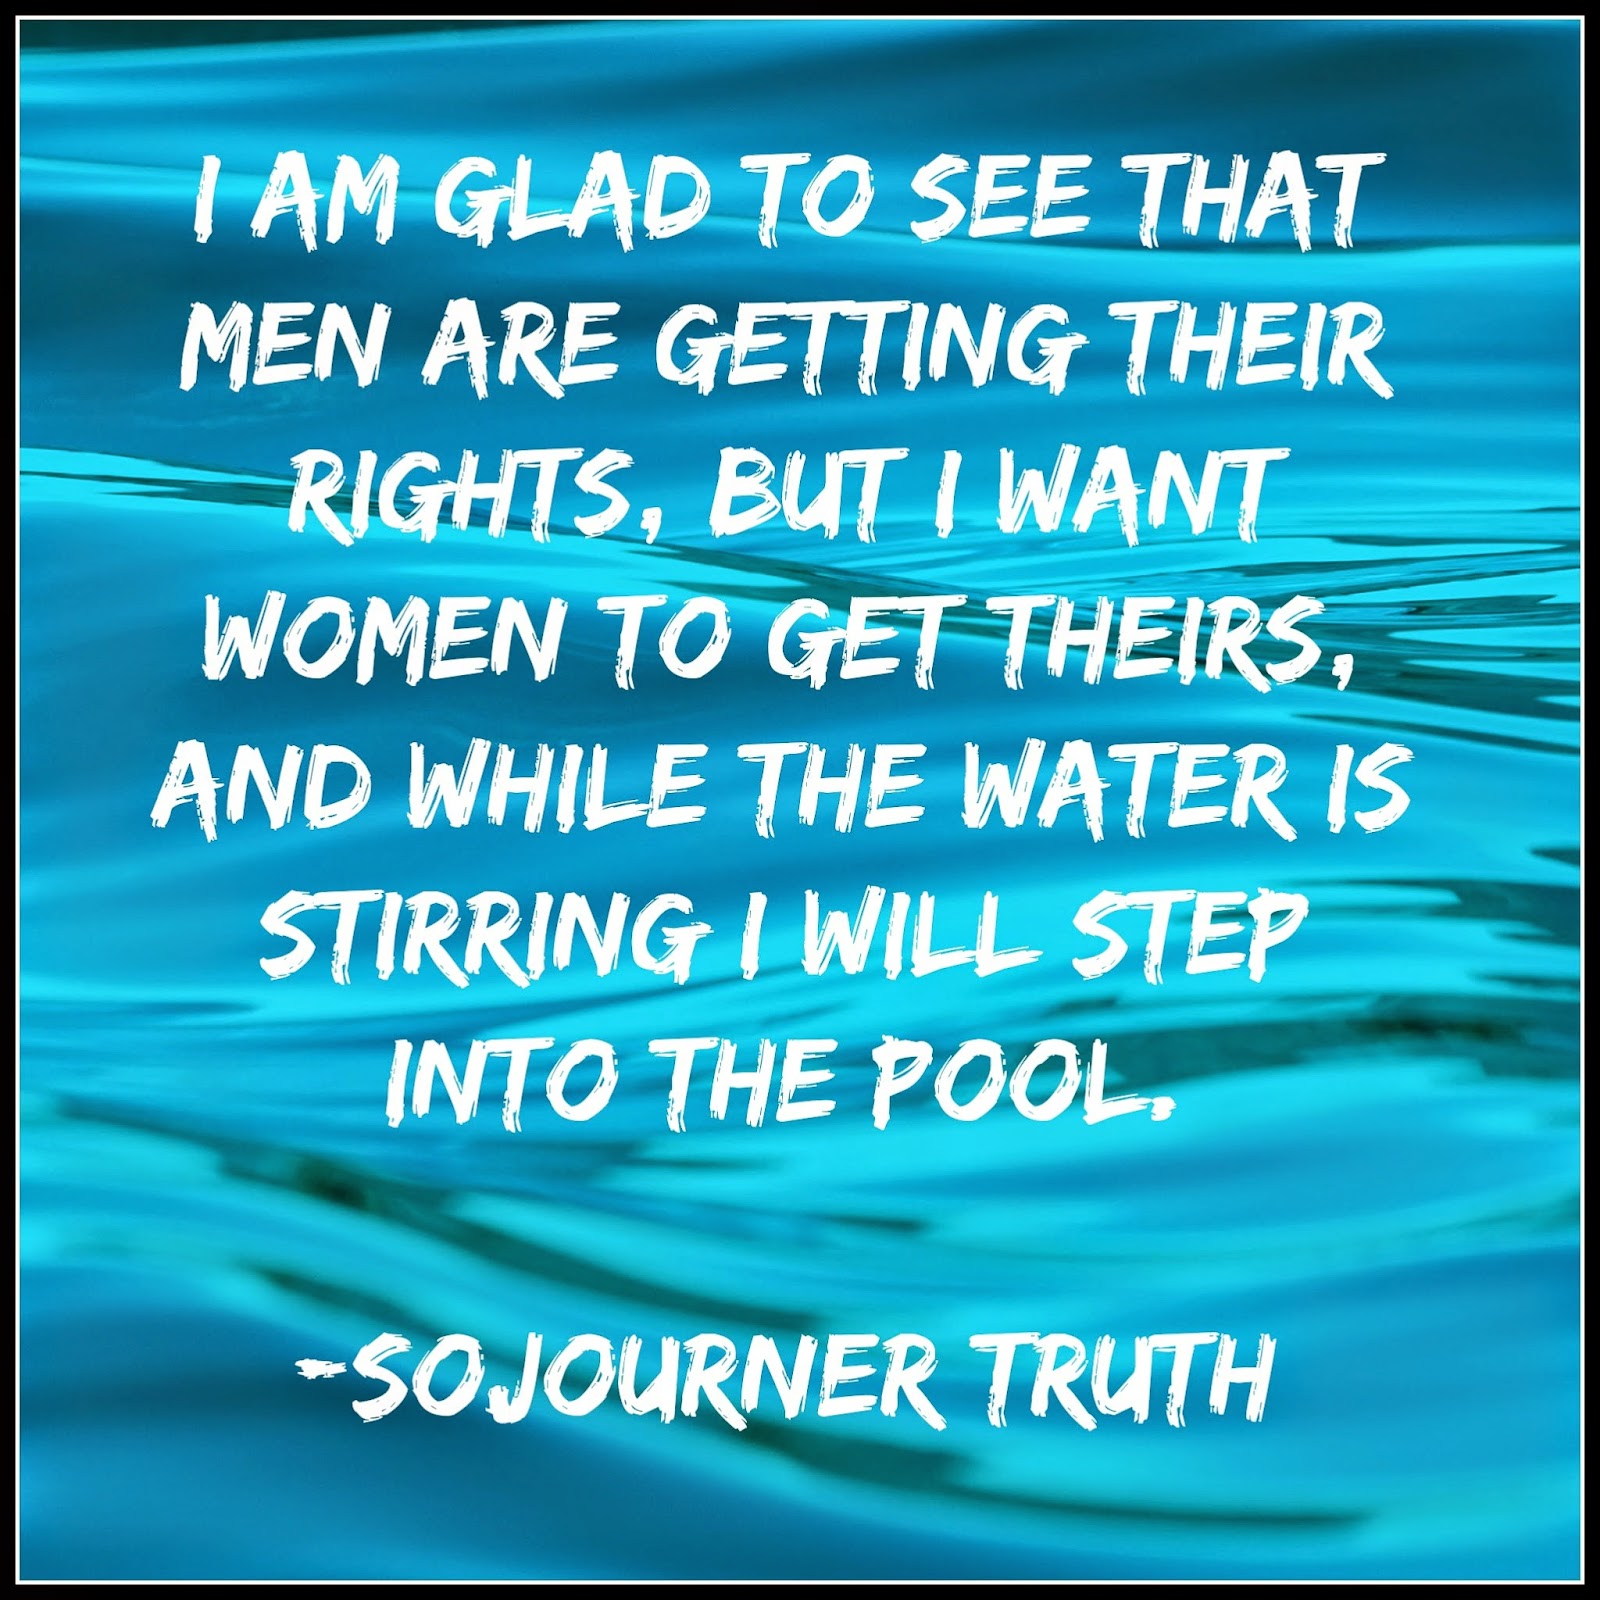 Sojourner Truth I am glad to see that men are getting their rights, but I want women to get theirs, and while the water is stirring I will step into the pool.